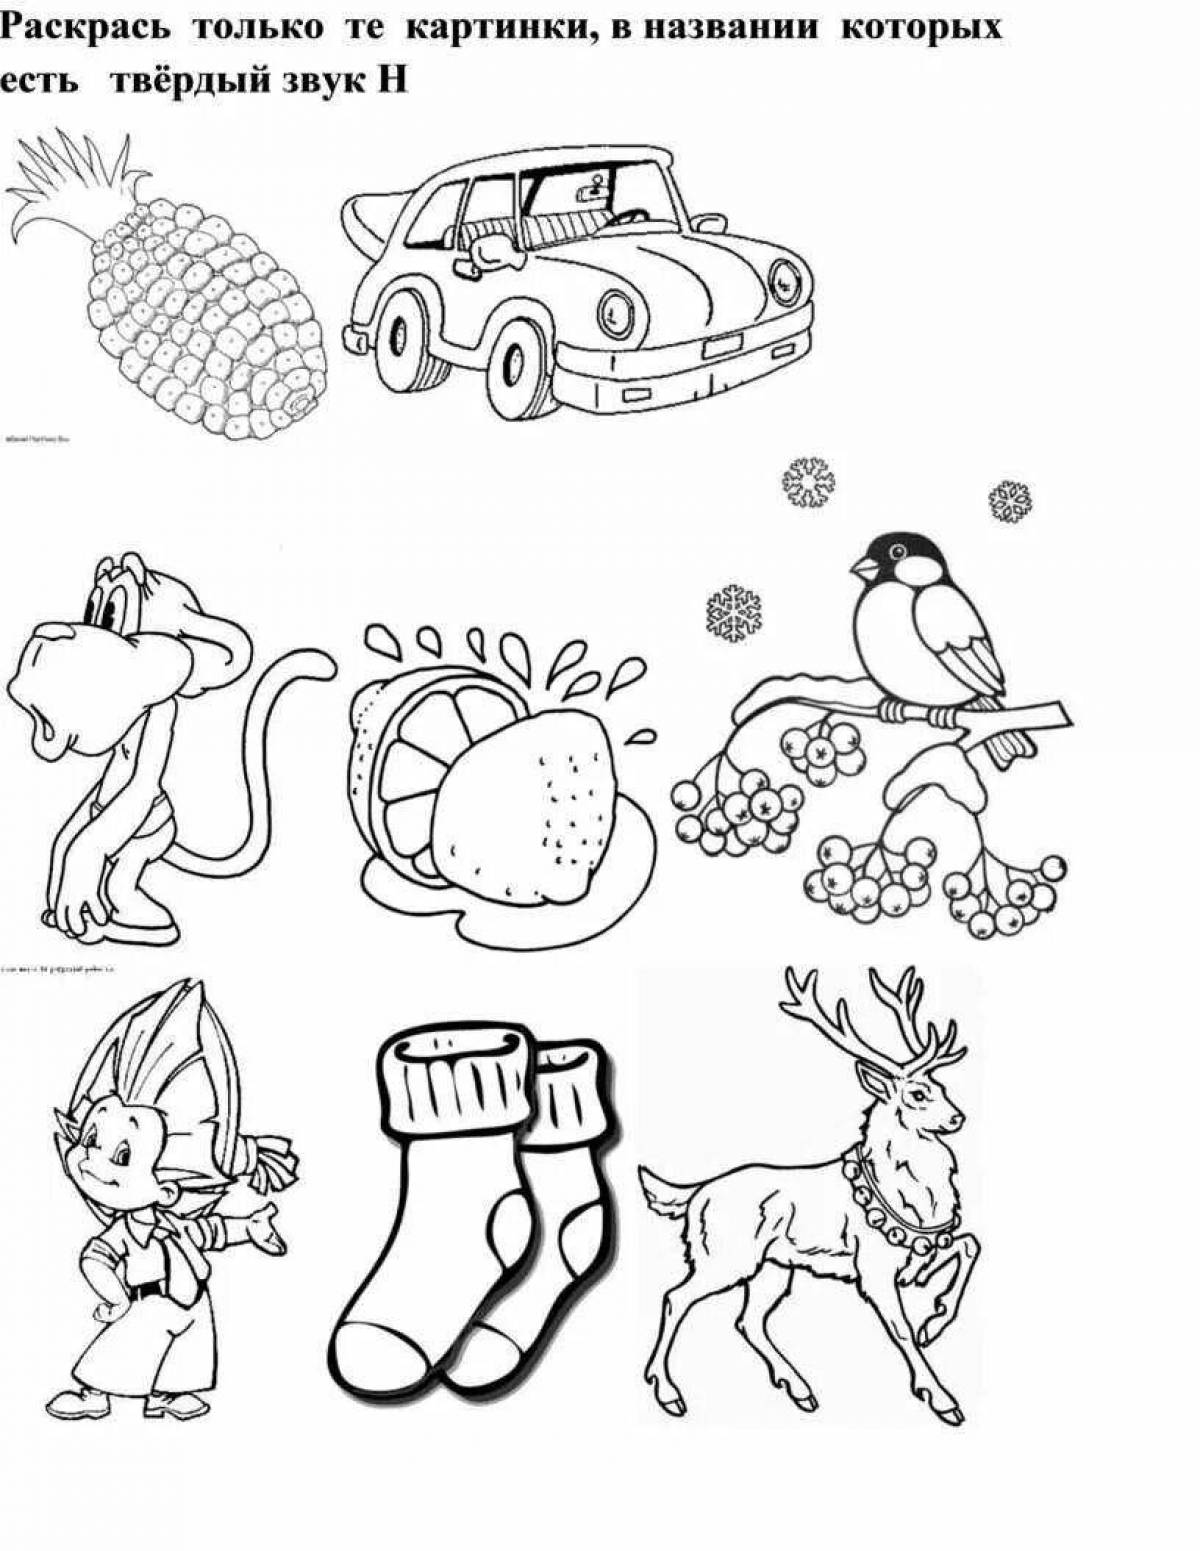 Fun m sound coloring page for kids